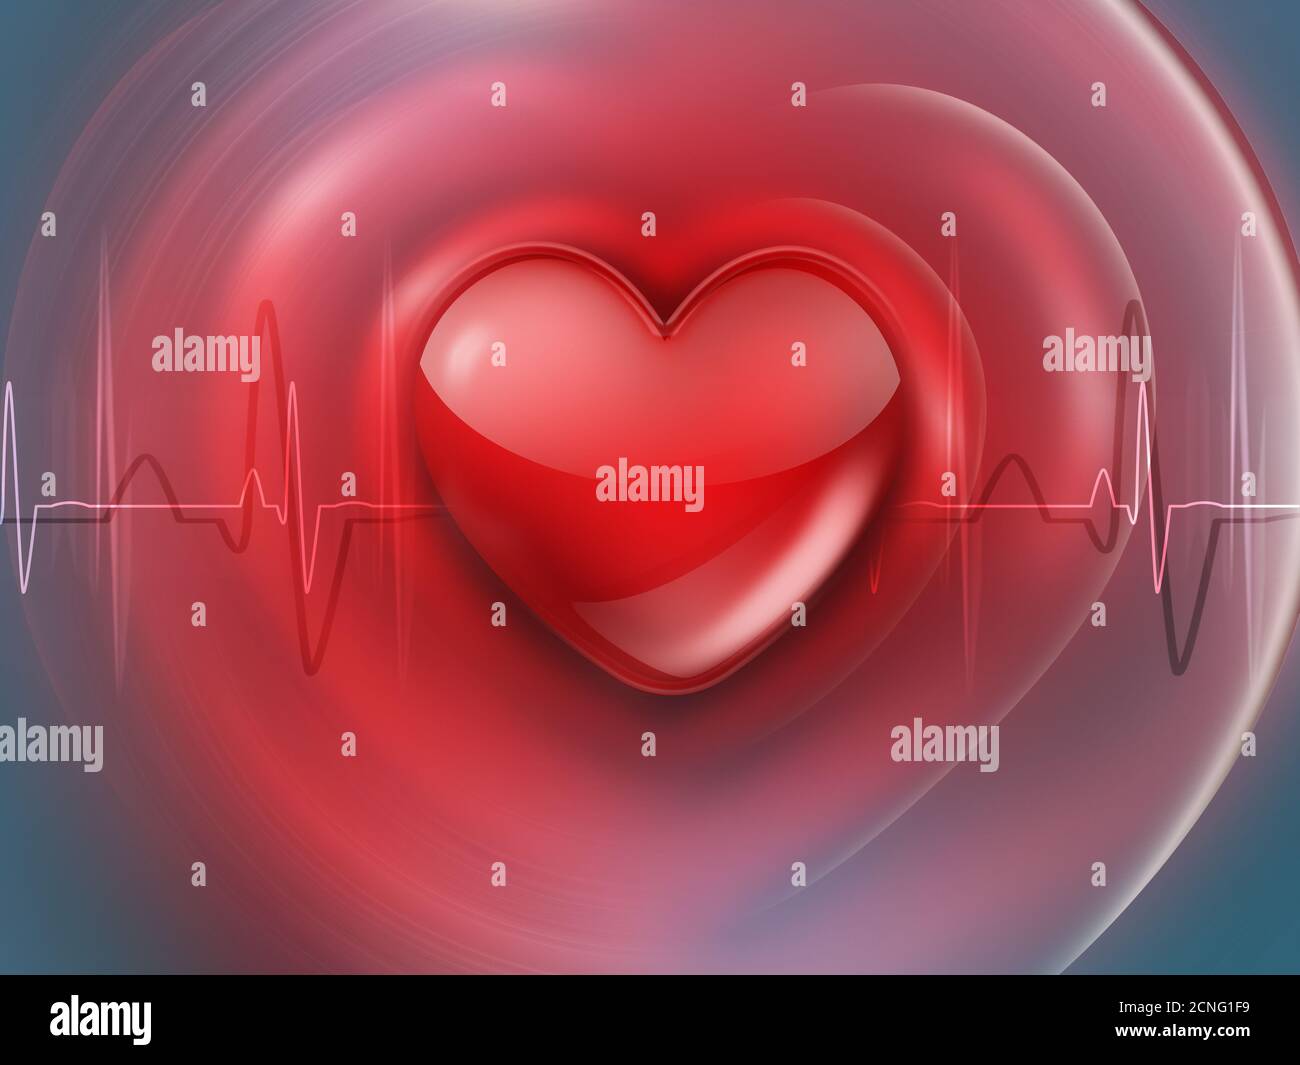 Medical background with red heart Stock Photo